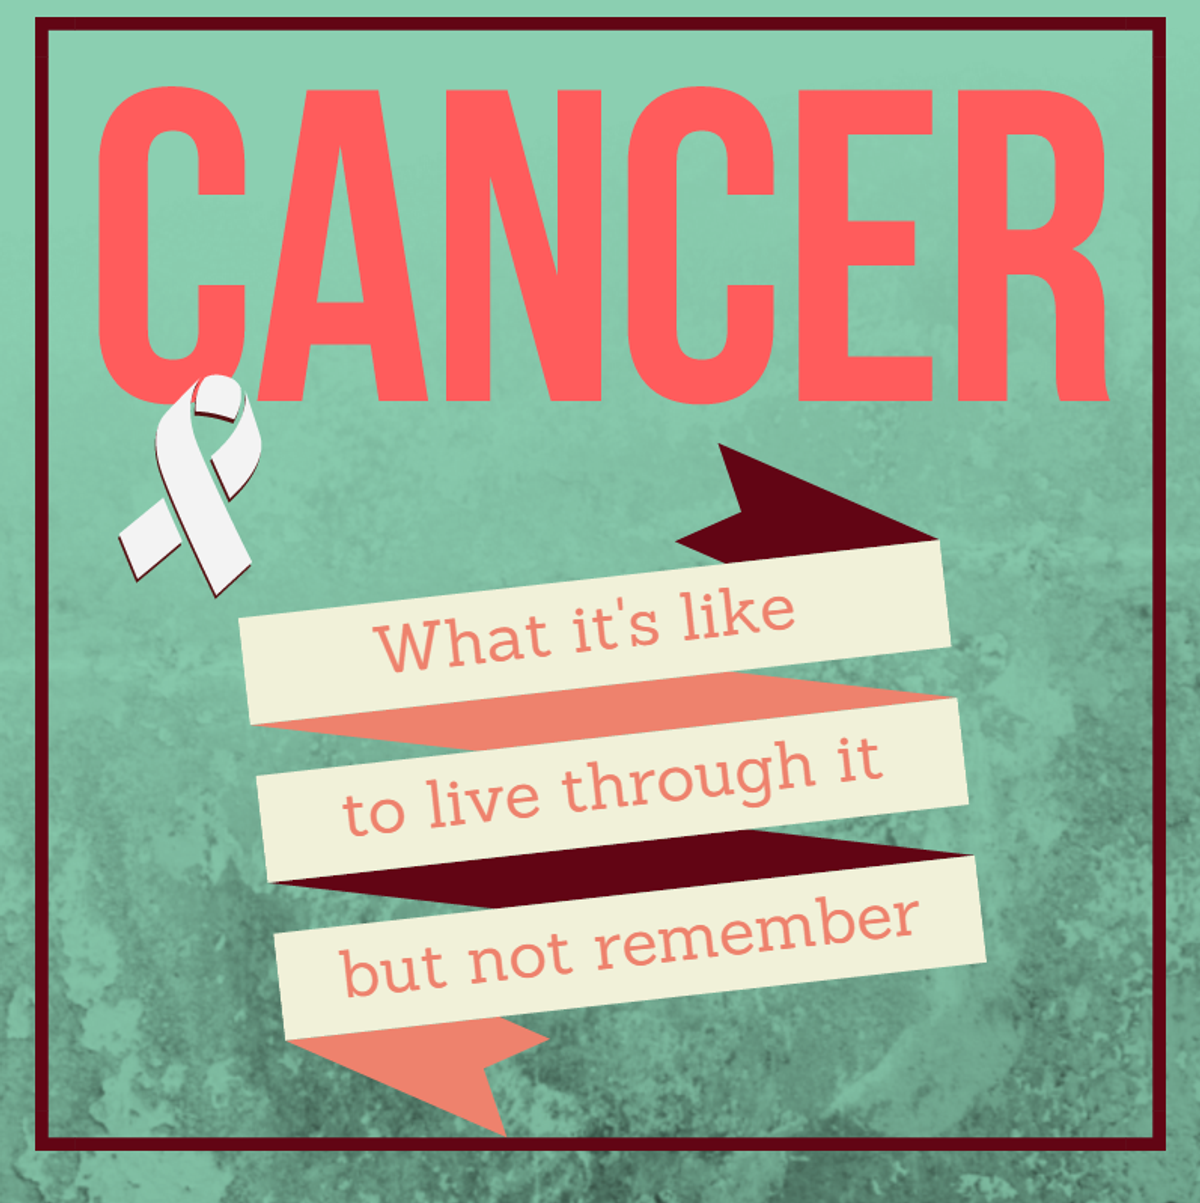 I'm a "Cancer Kid", but I Don't Remember